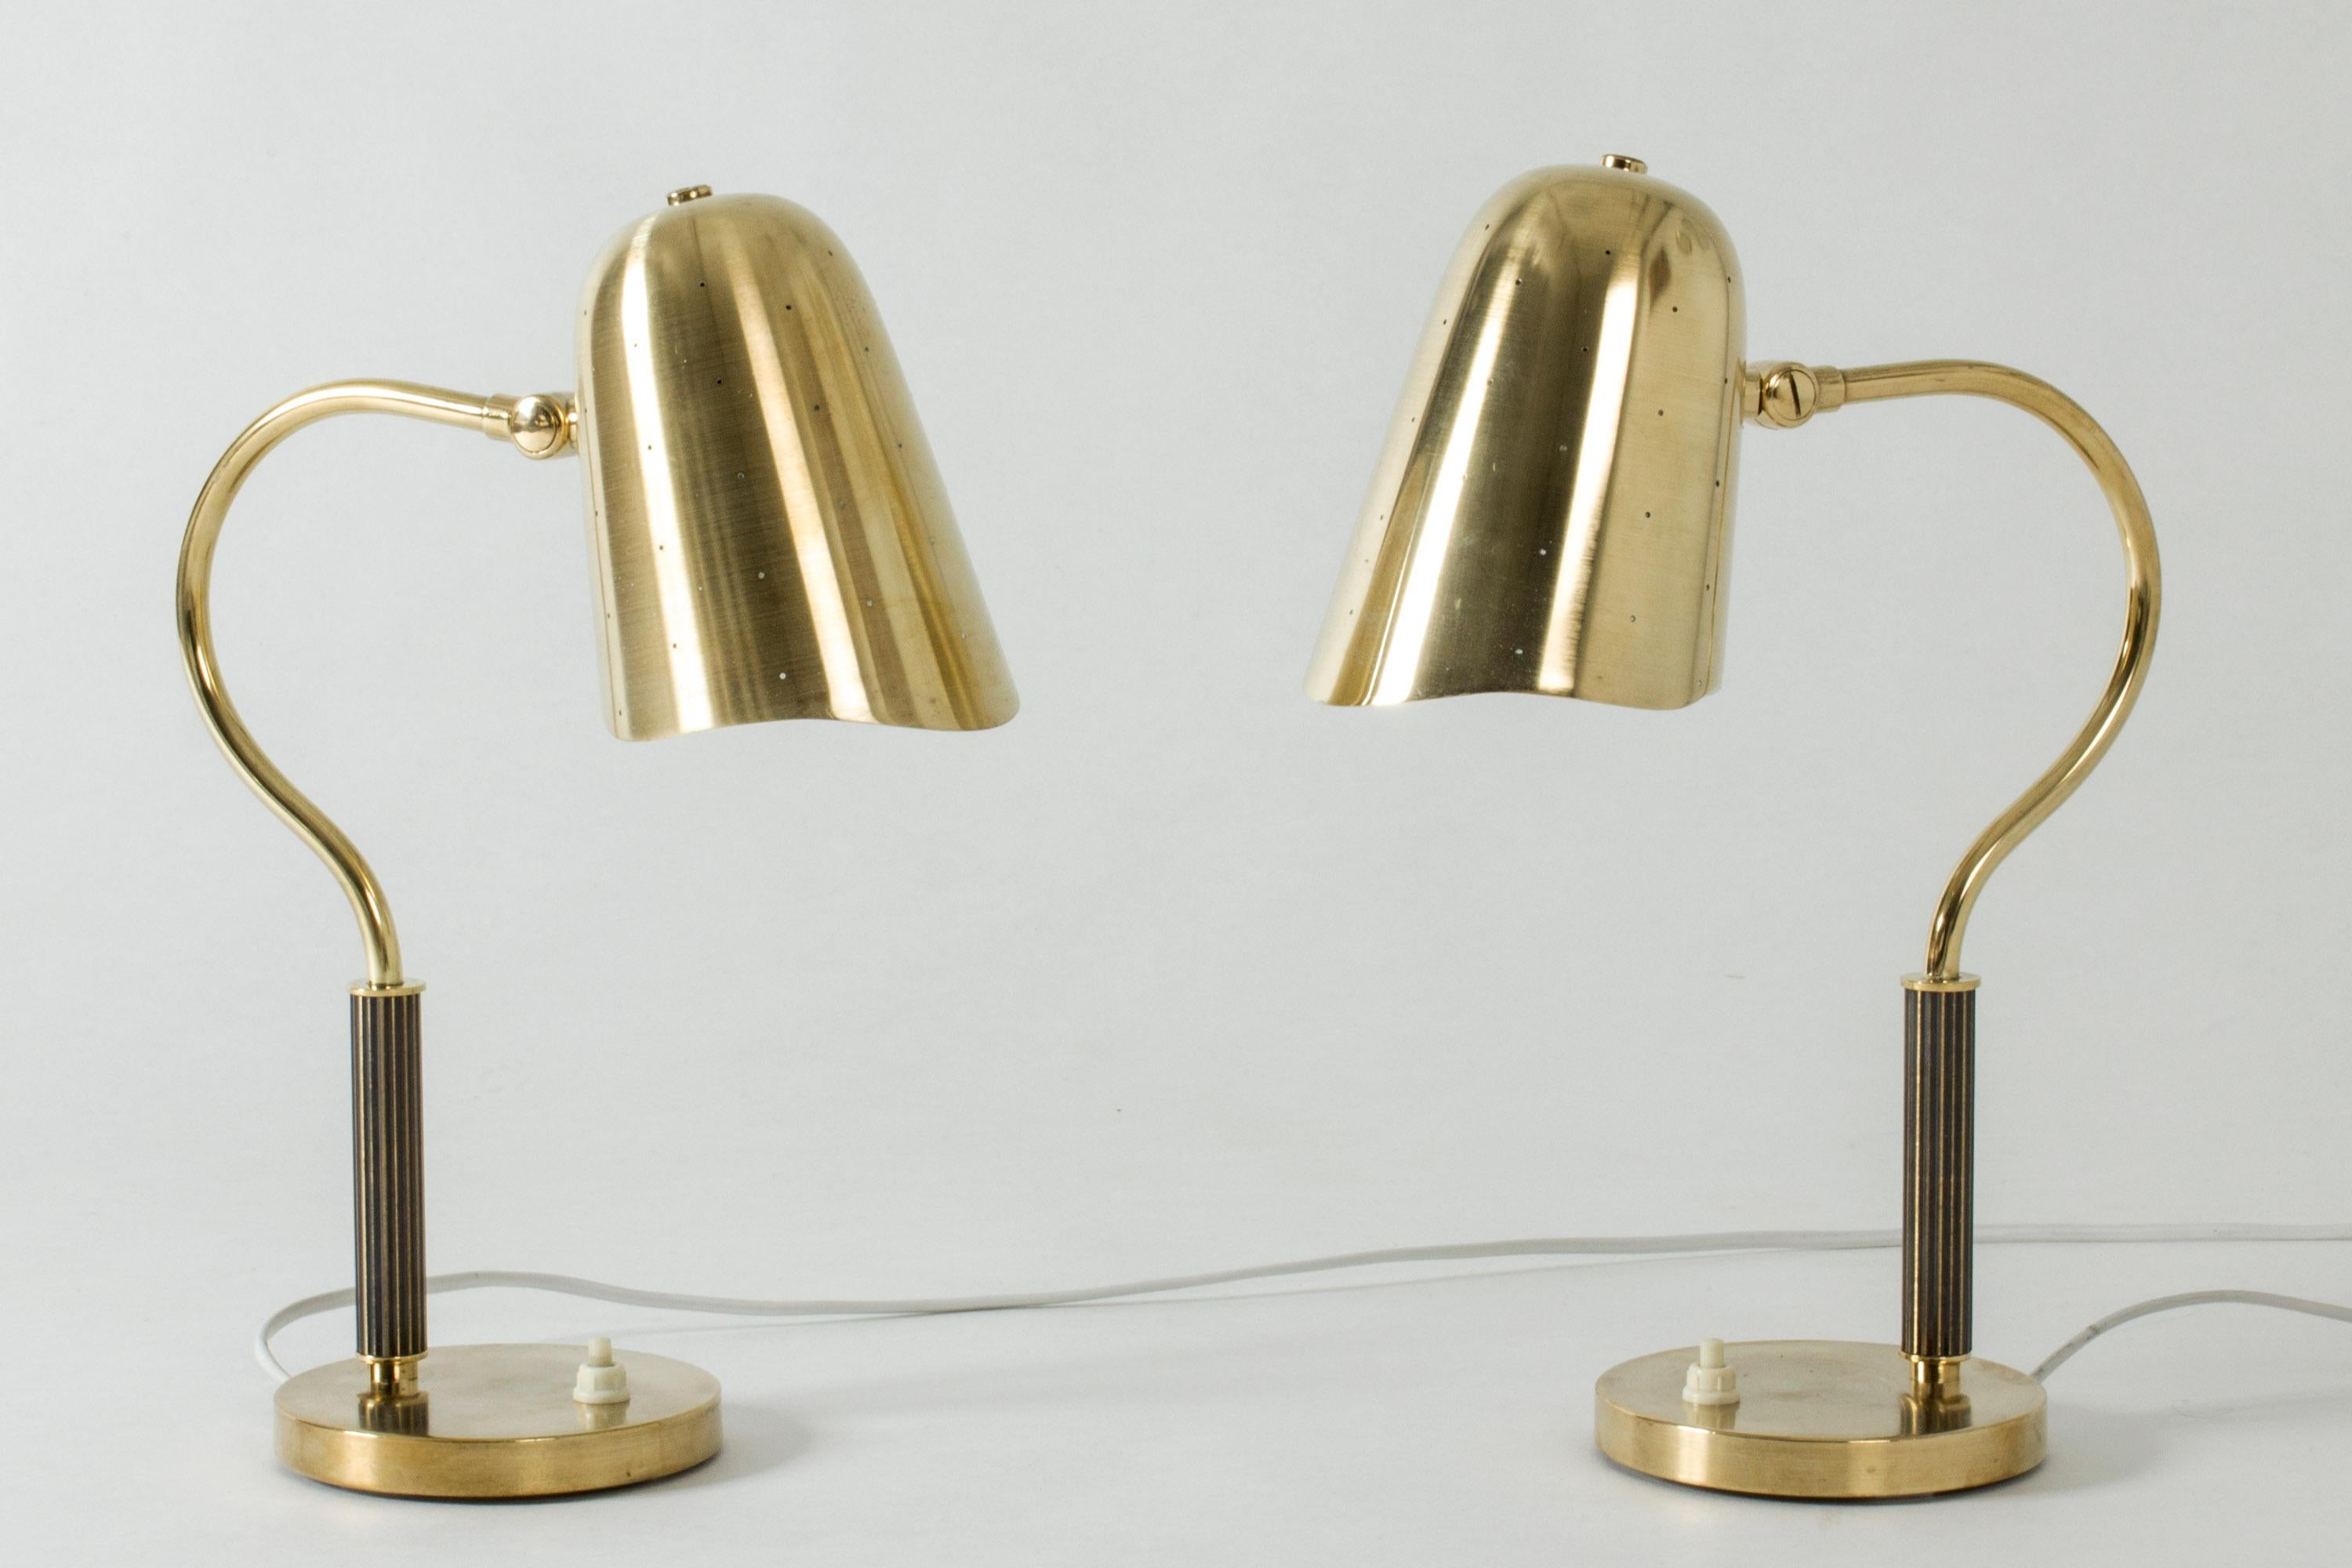 Pair of elegant brass table lamps, perfect for bedside tables. Perforated shades that let the light out like little stars when lit. Curved necks and handles embossed with stripes.